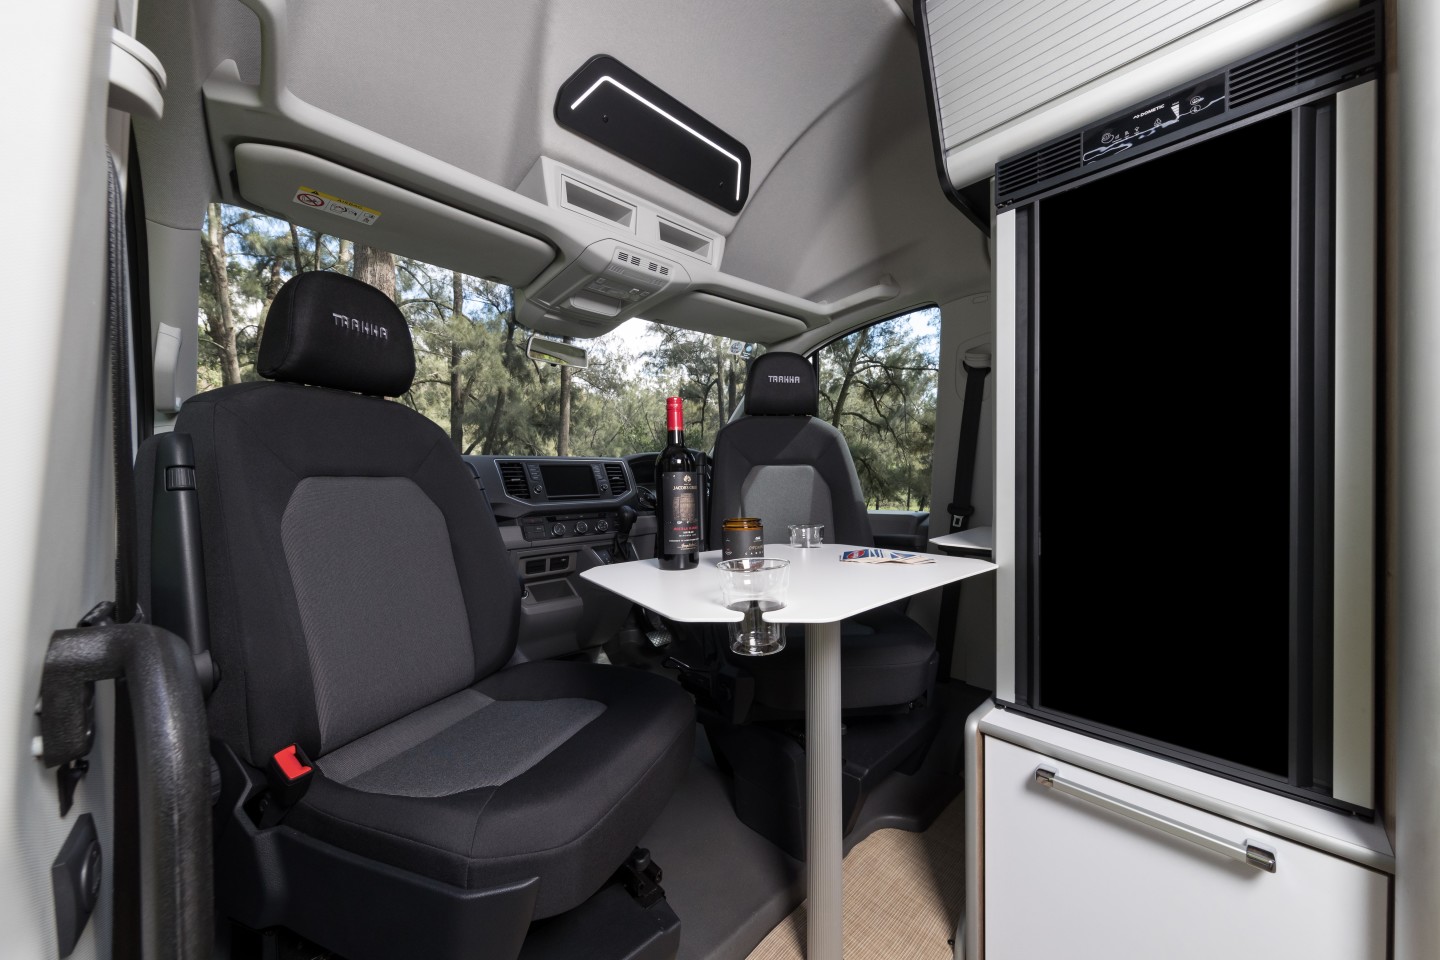 The Trakka Akuna A2M has a cozy but functional two-seat dining lounge